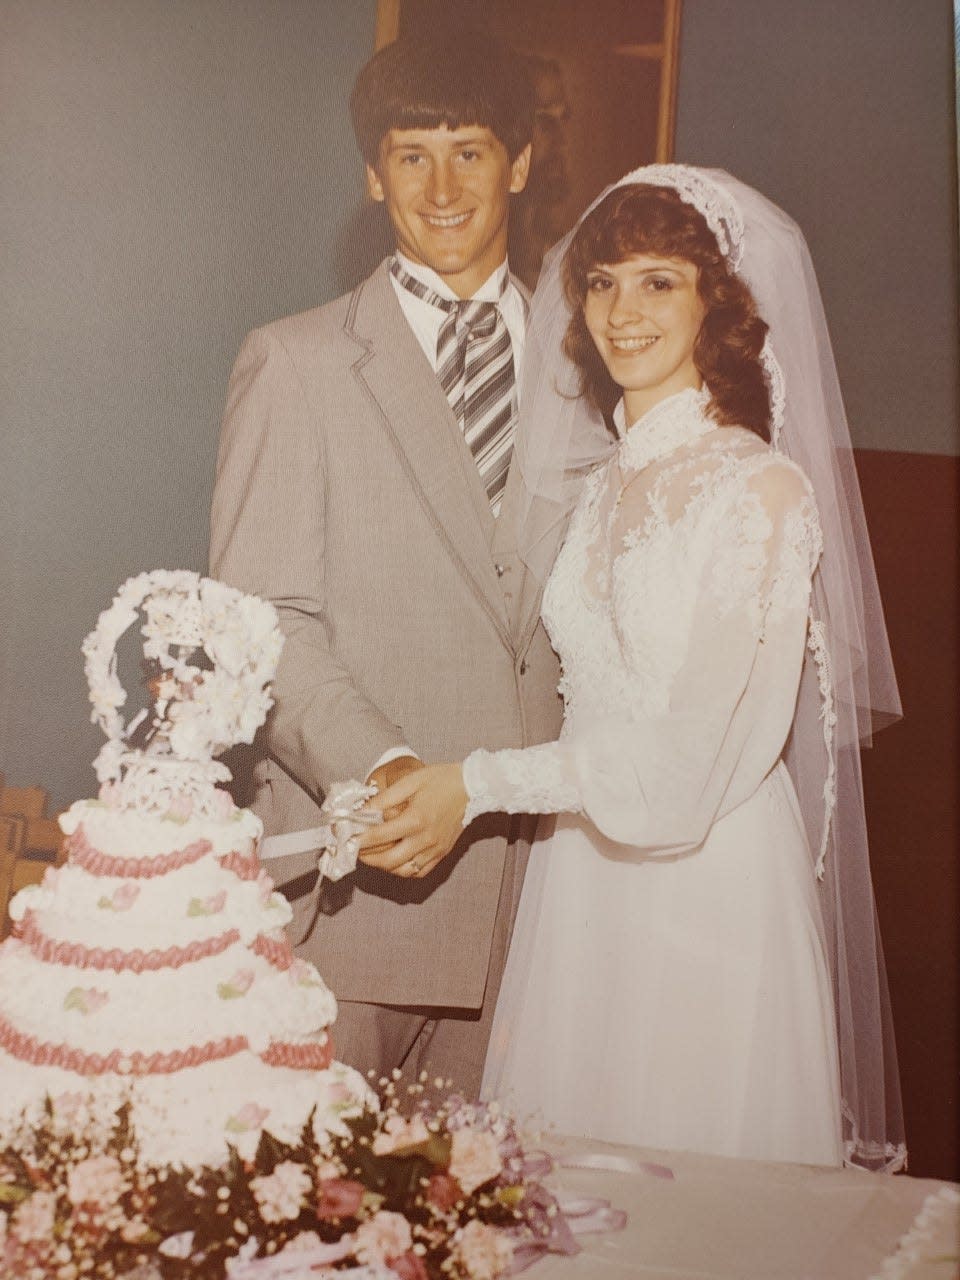 Rod and Debra McCune pose for the ceremonial cake-cutting photo at their wedding in 1982 in Newcomerstown. The late Rod Smith, of Rod's Donut Shop in Uhrichsville, made the cake after the first one collapsed.